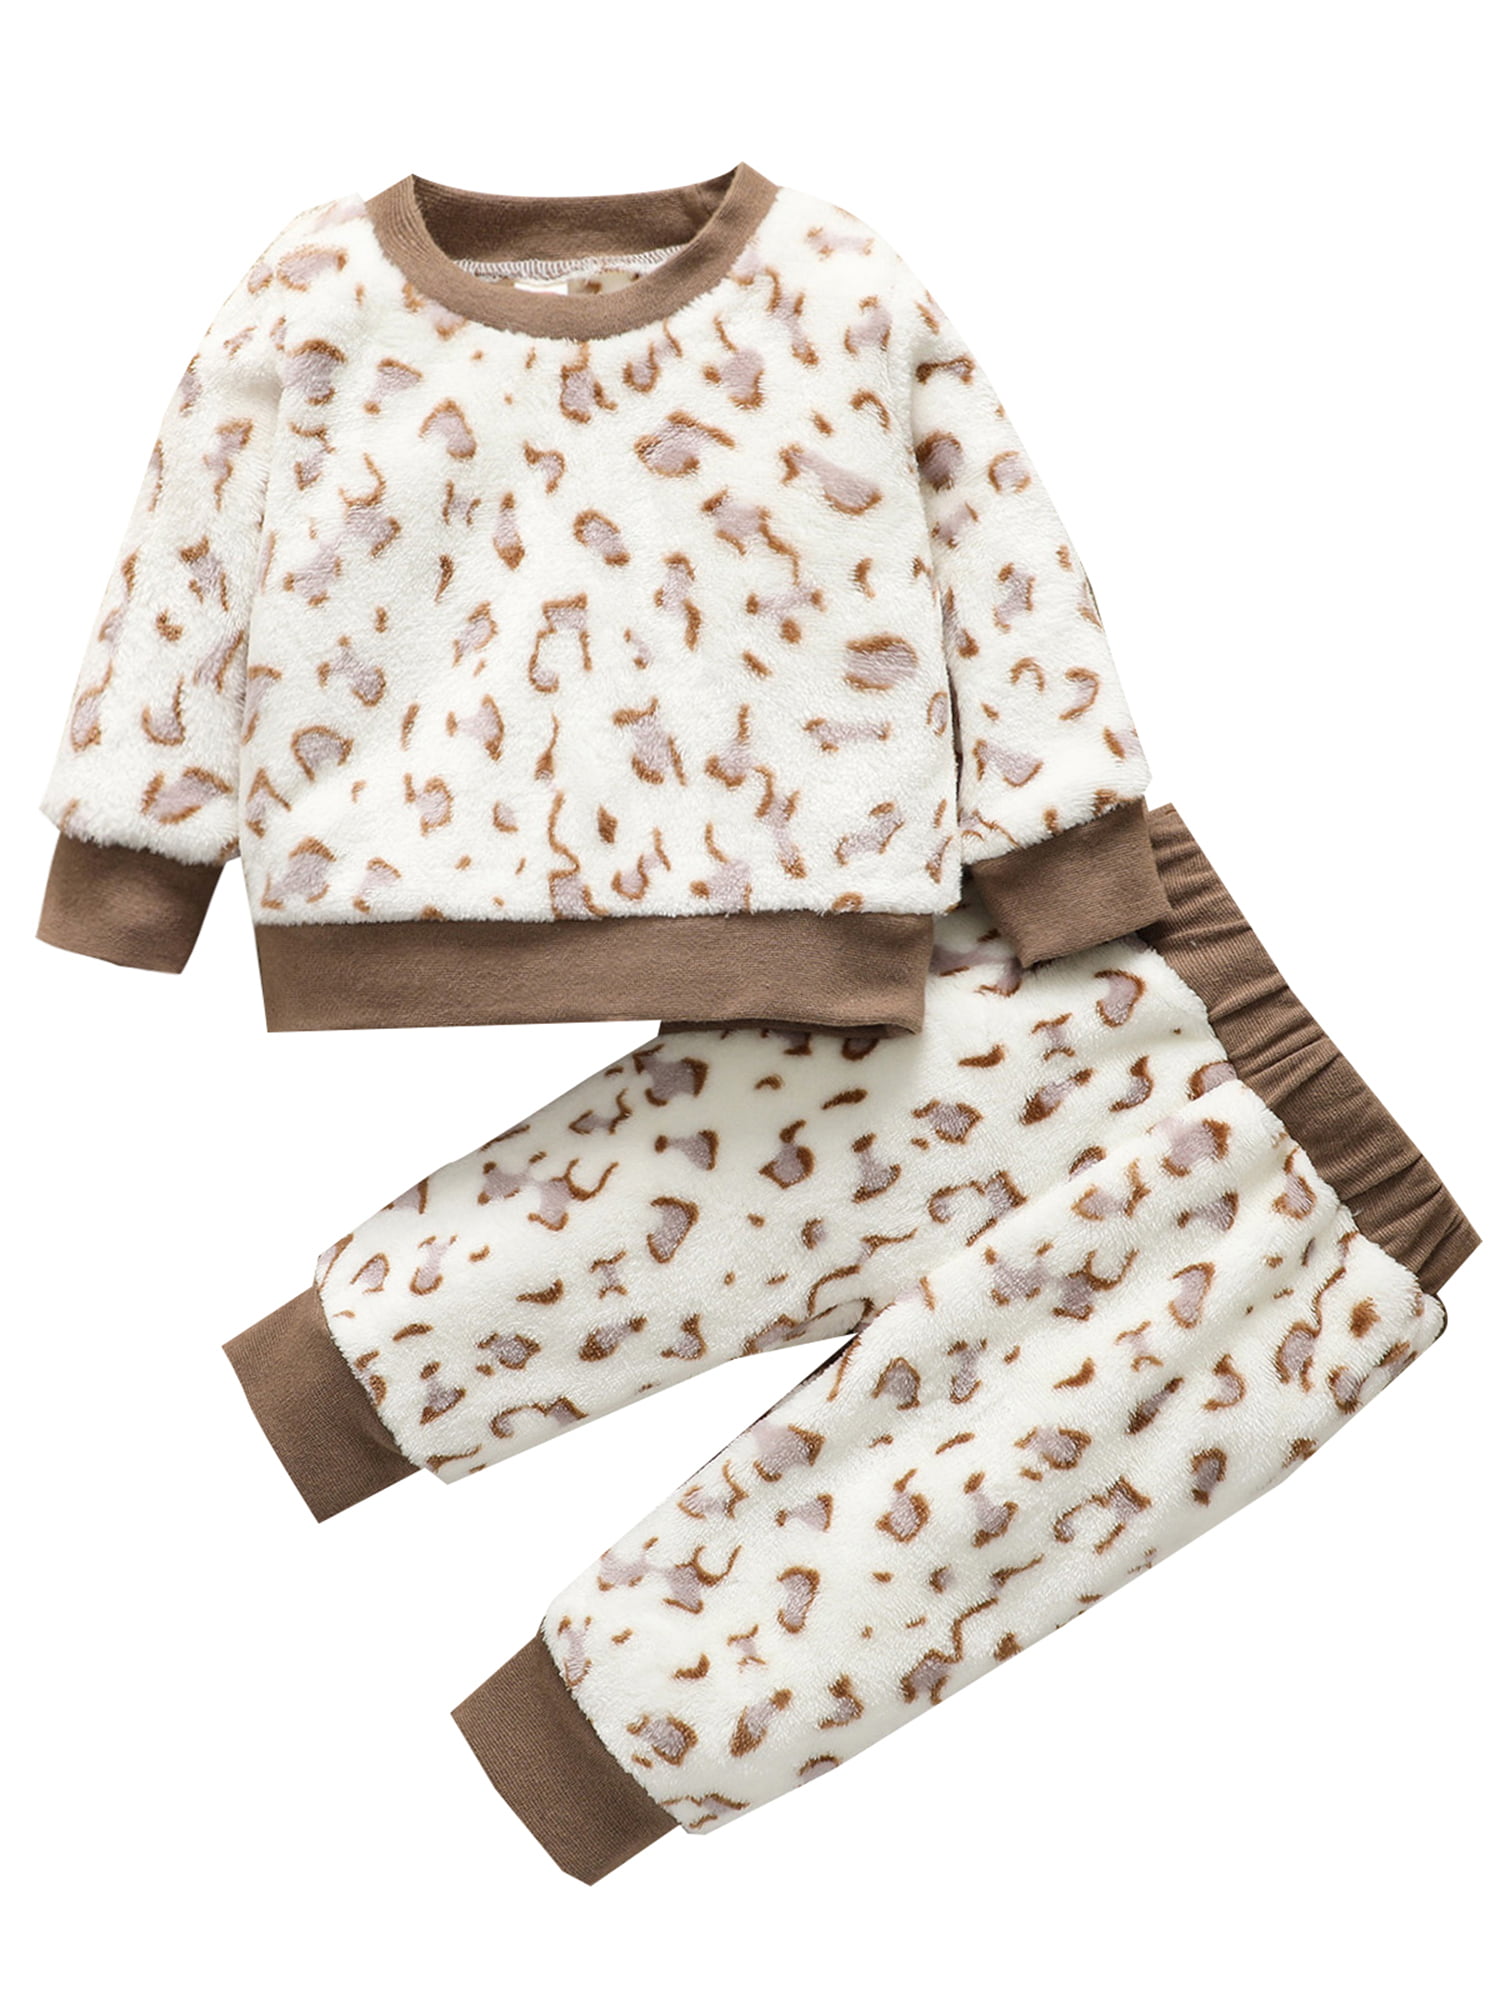 Toddler Baby Boy Girl Fall Winter Outfit Leopard Long Sleeve Pullover  Sweatshirt T-Shirt Tops Casual Long Pants Set